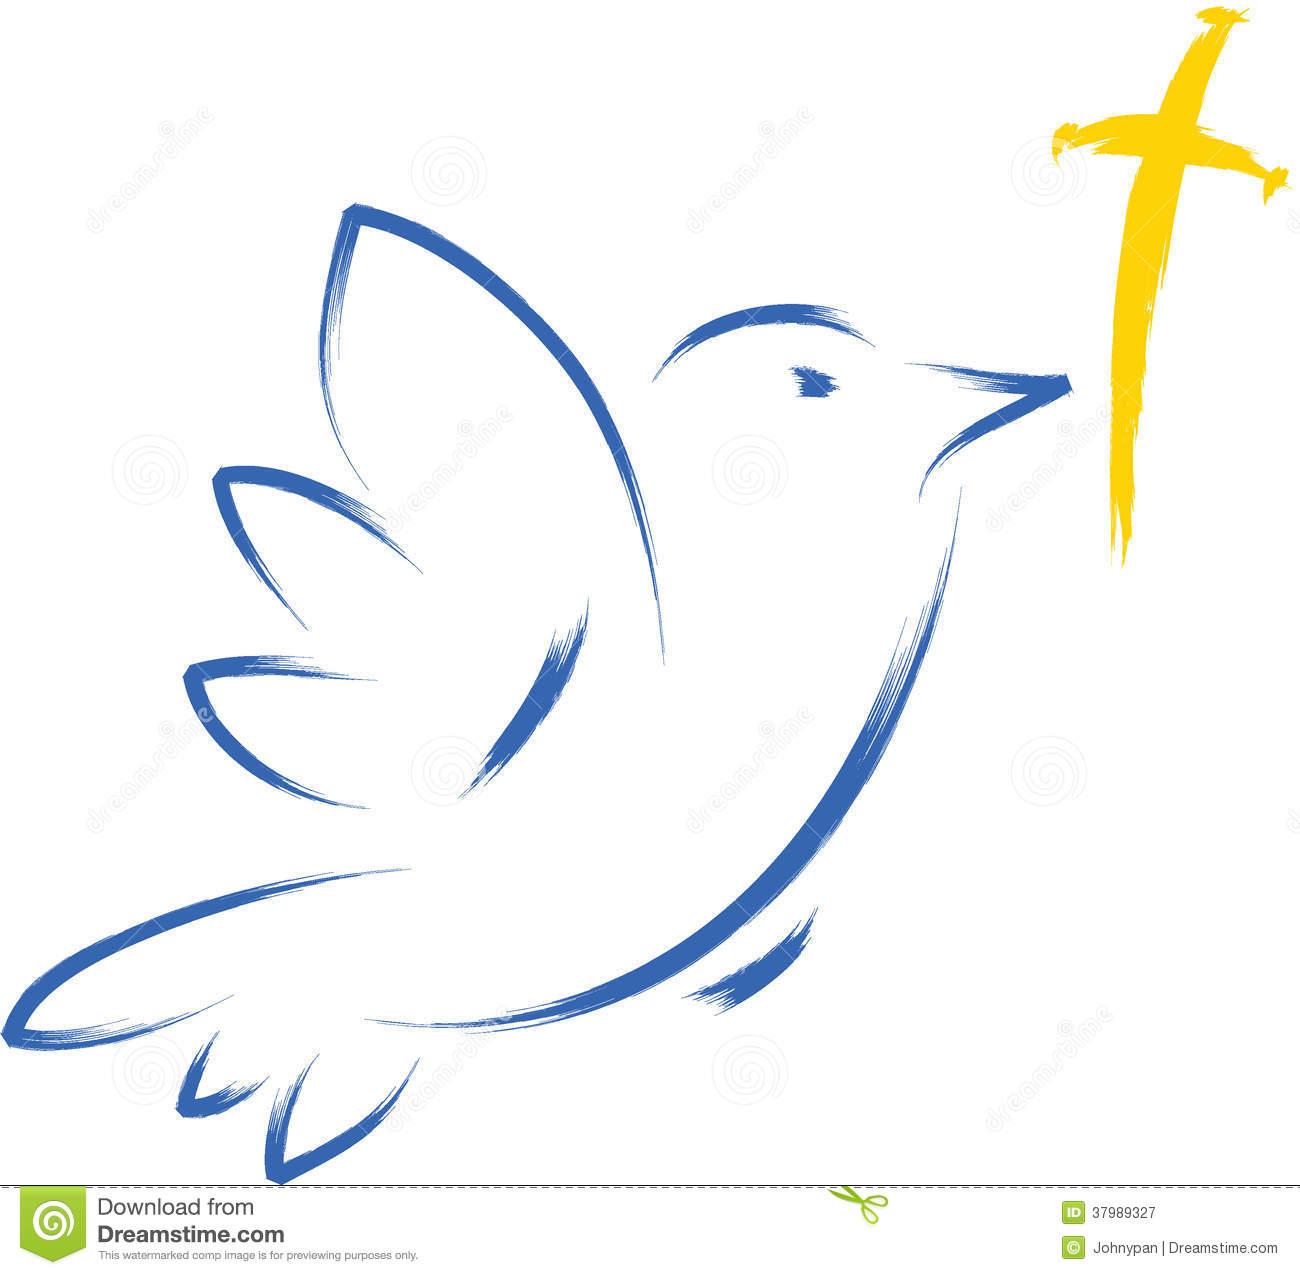 Funeral Dove Clipart Dove With Cross Royalty Free